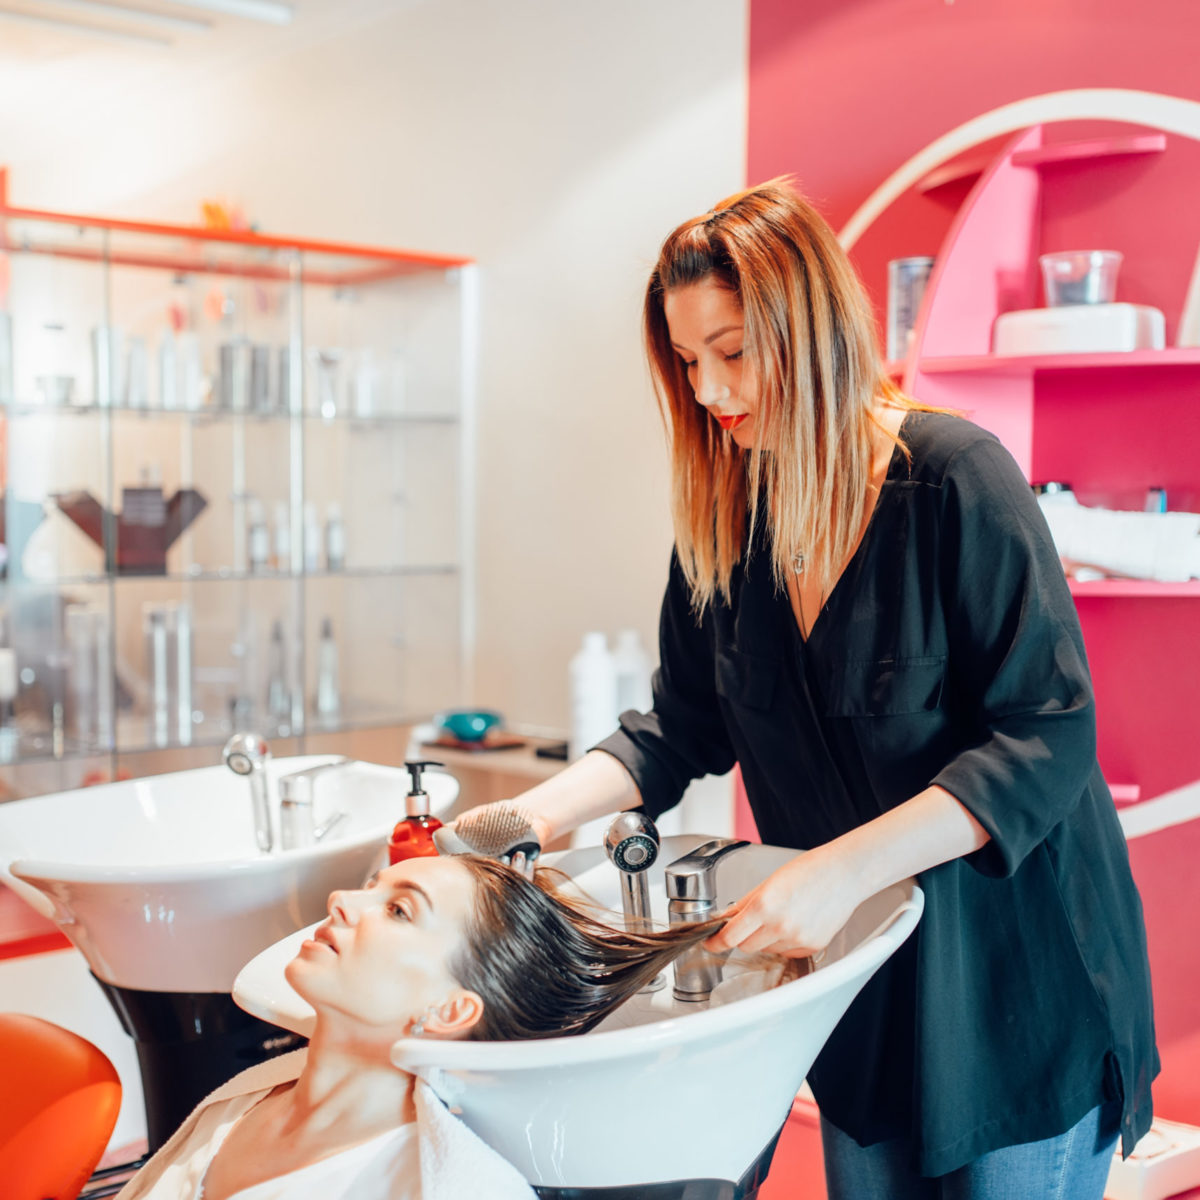 Hairdresser washes customer hair in hairdressing salon. Professional haircare in beauty studio, female client and beautician